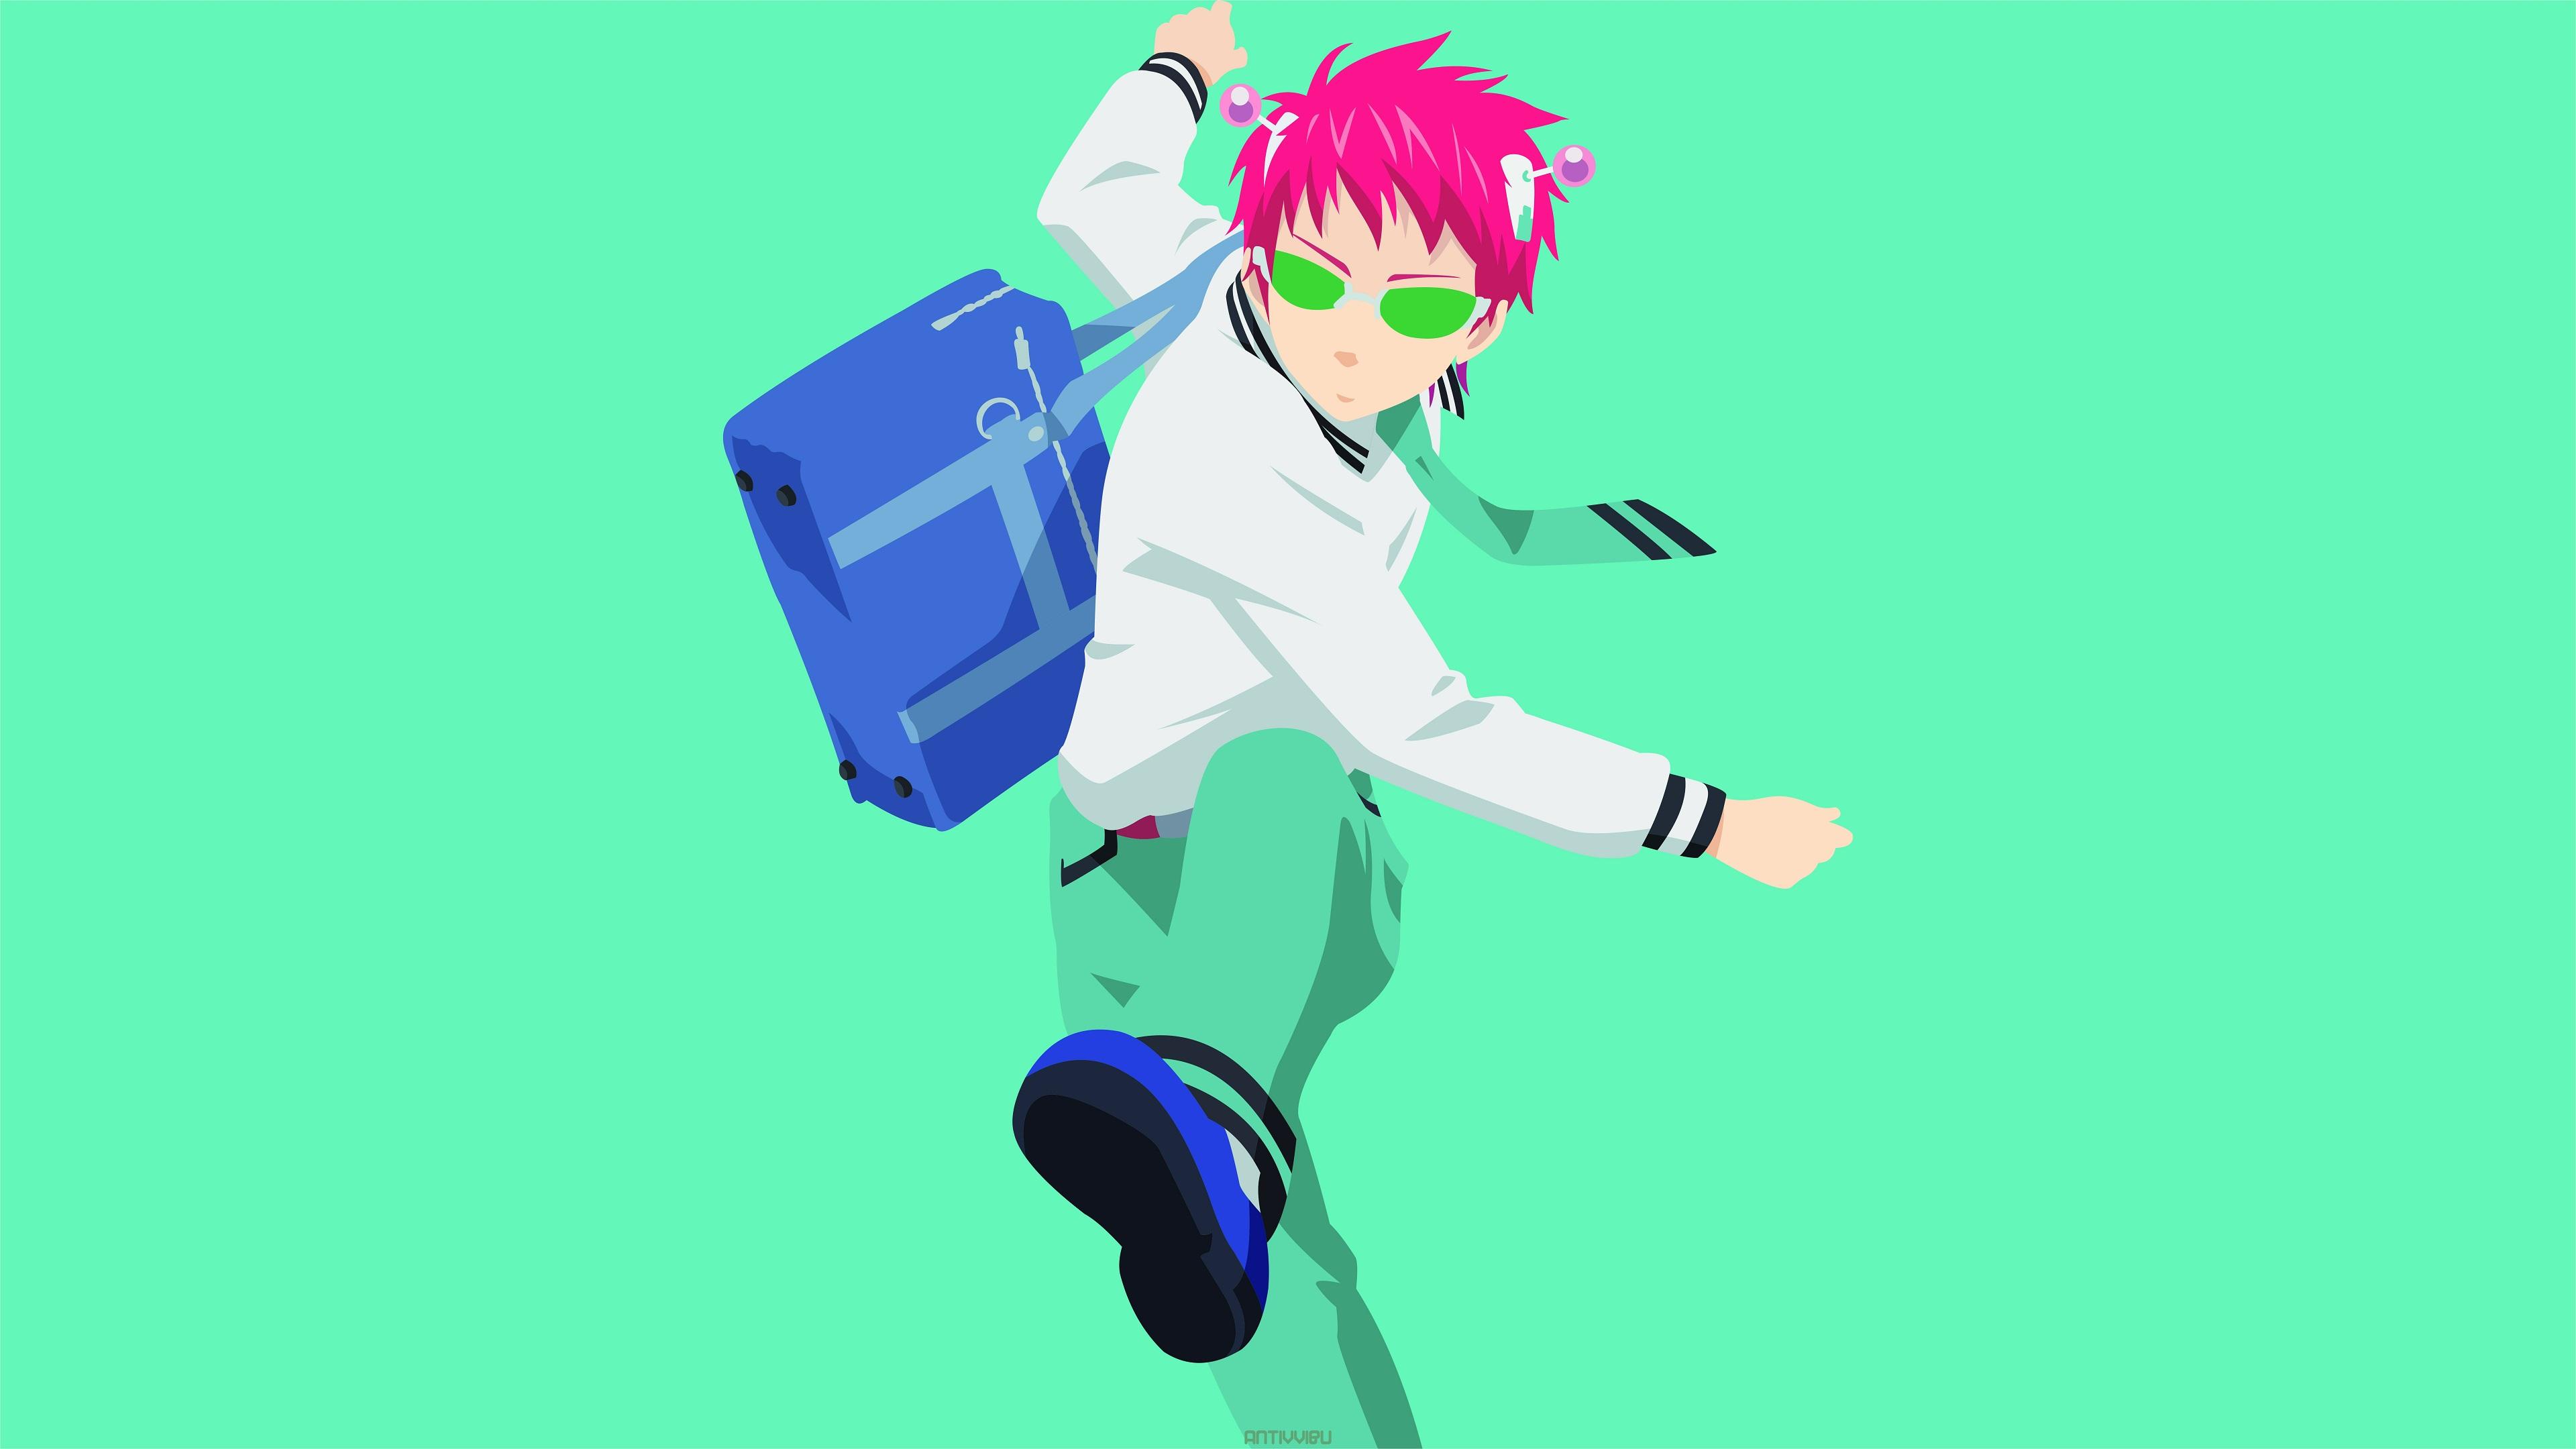 More Disastrous Life of Saiki K Anime in the Works